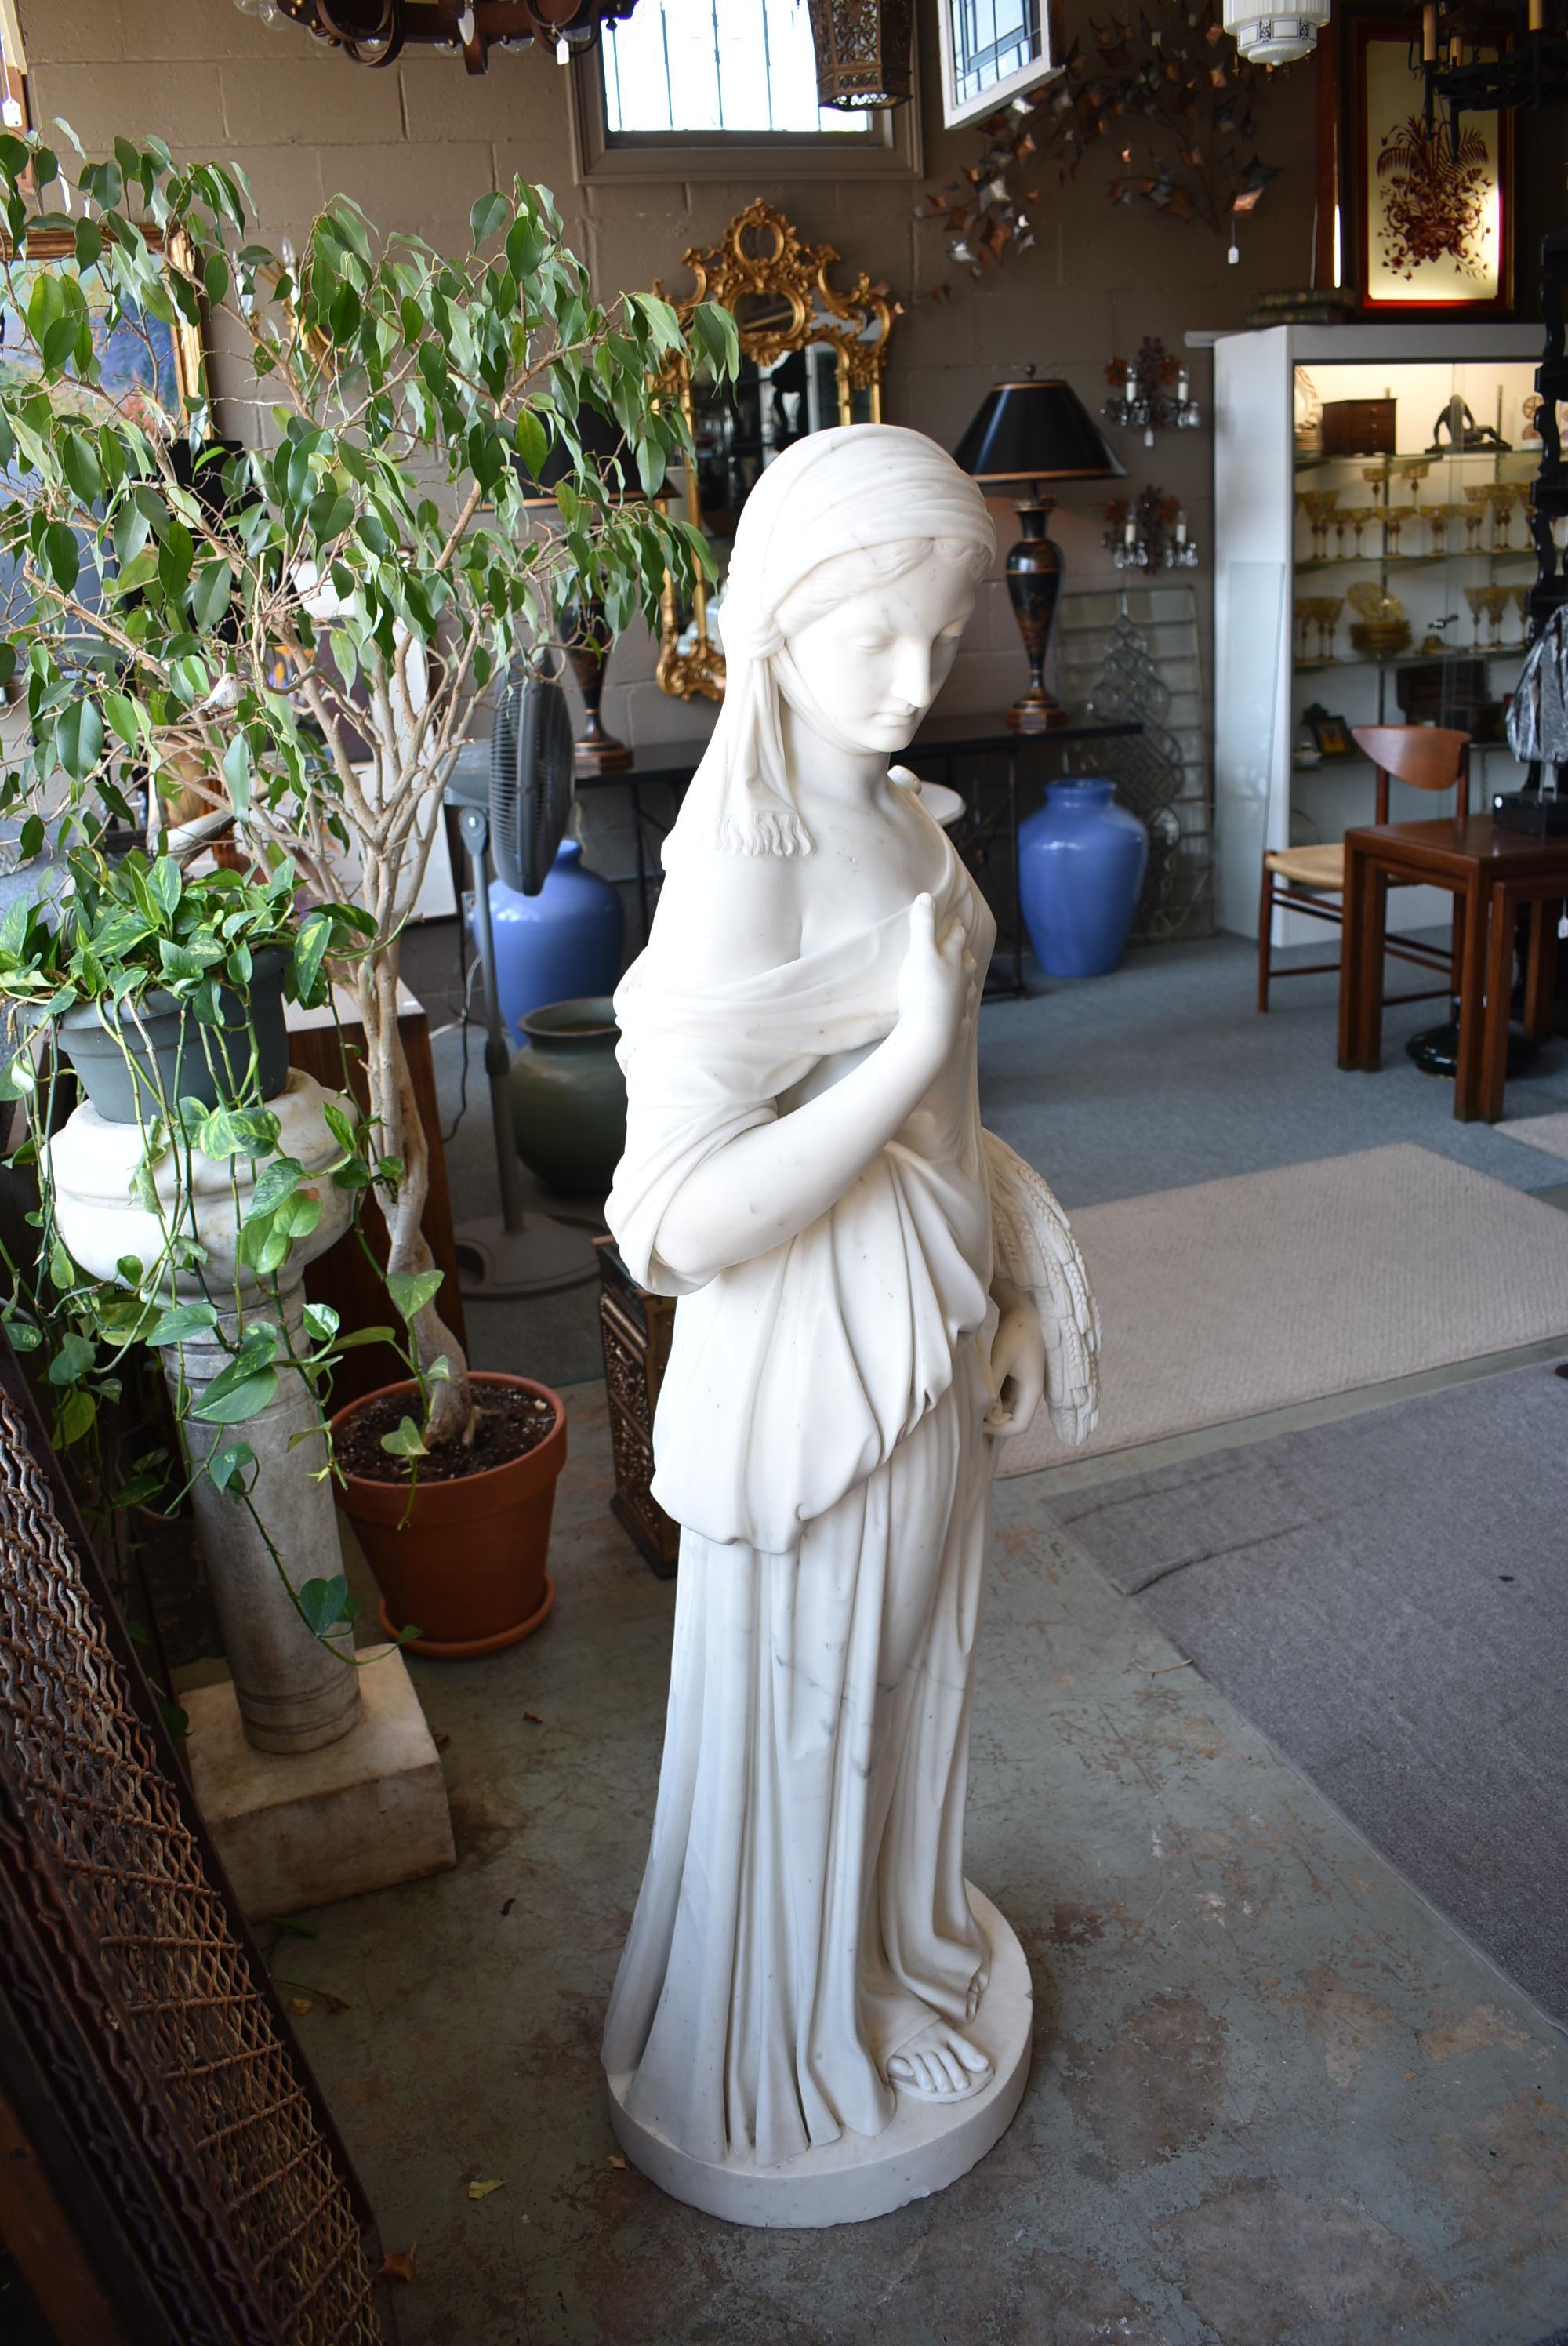 Turn-of-the-century to 1920s beautiful vintage Italian marble figural sculpture of a young woman depicted as the season of summer. This detailed sculpture would make an amazing garden focal feature or use inside as a statement piece. This elegant